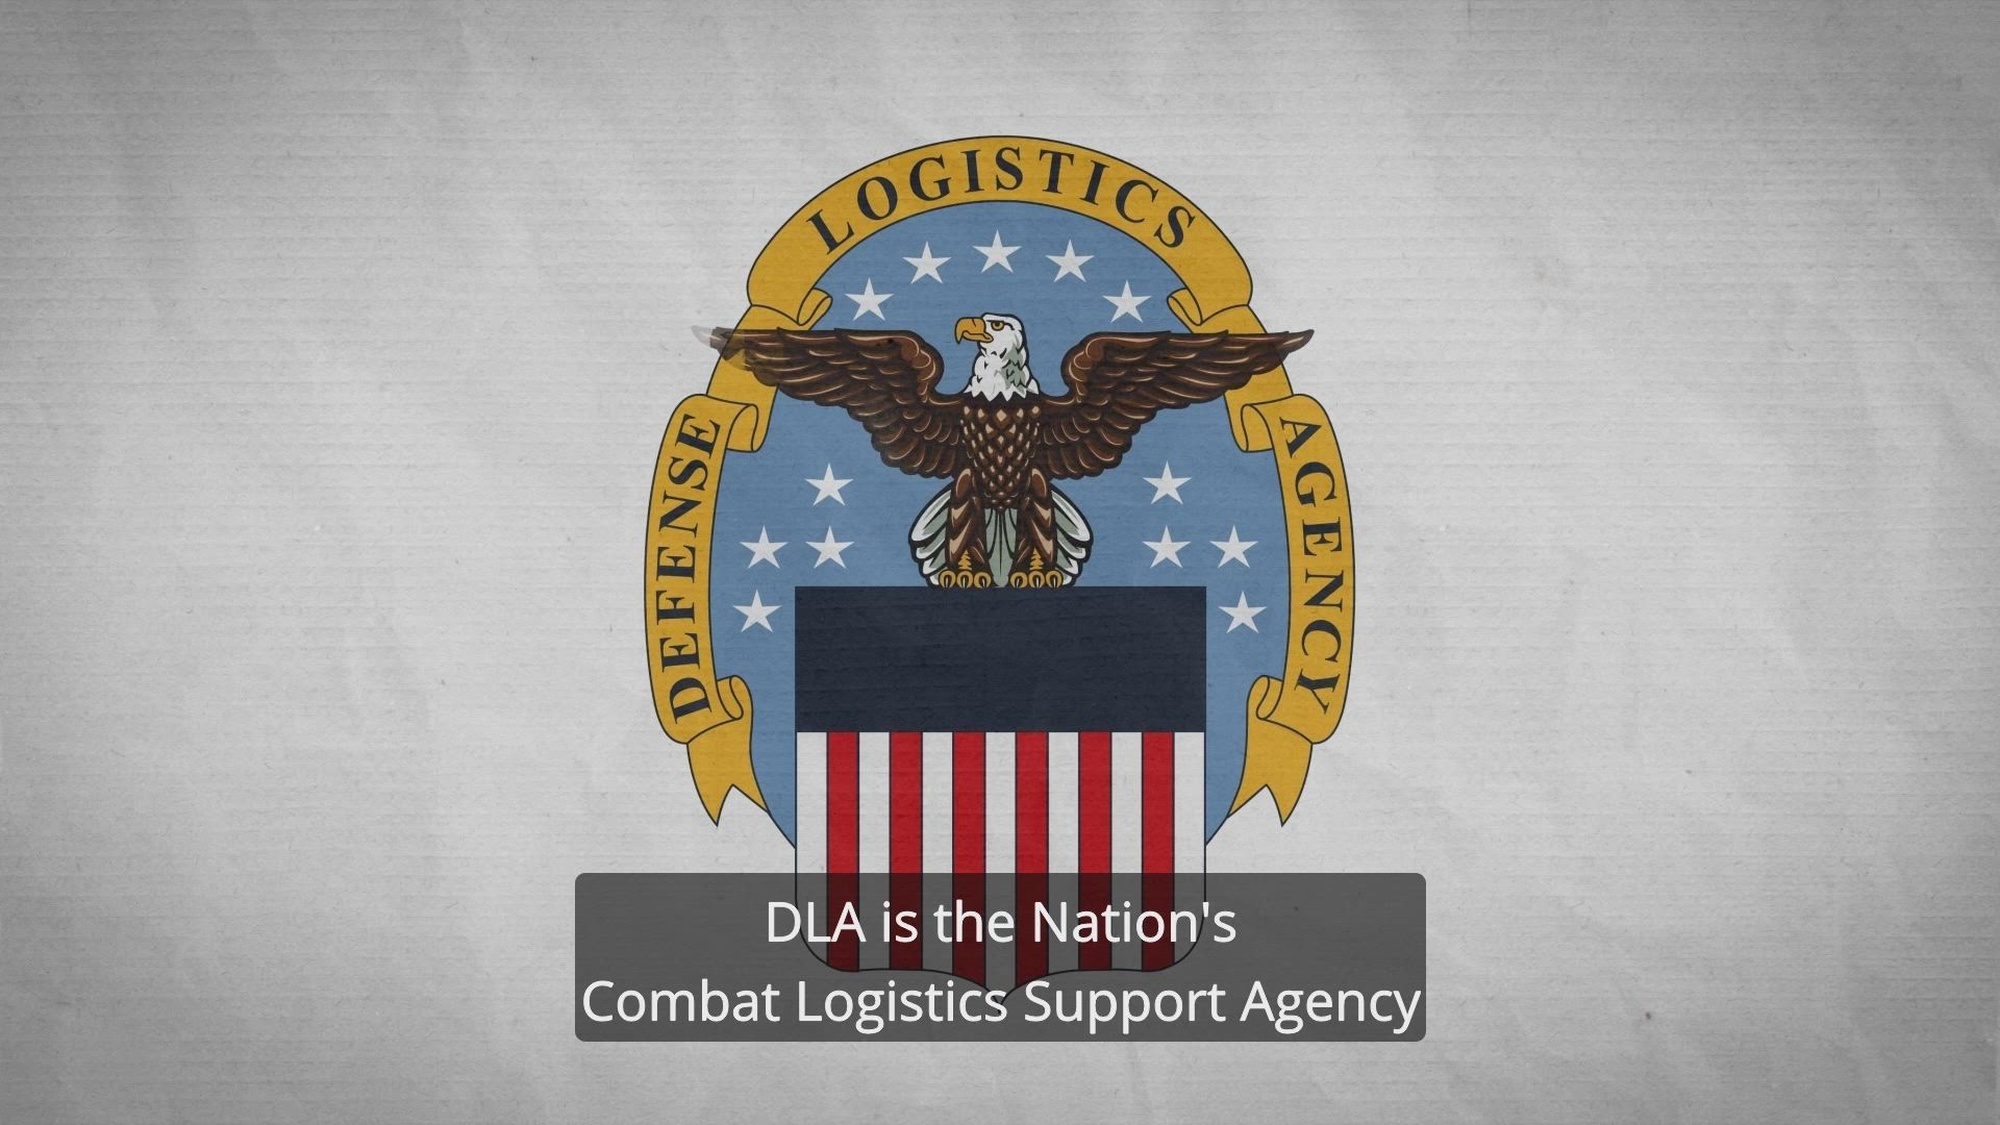 The Nation's Combat Logistics Support Agency